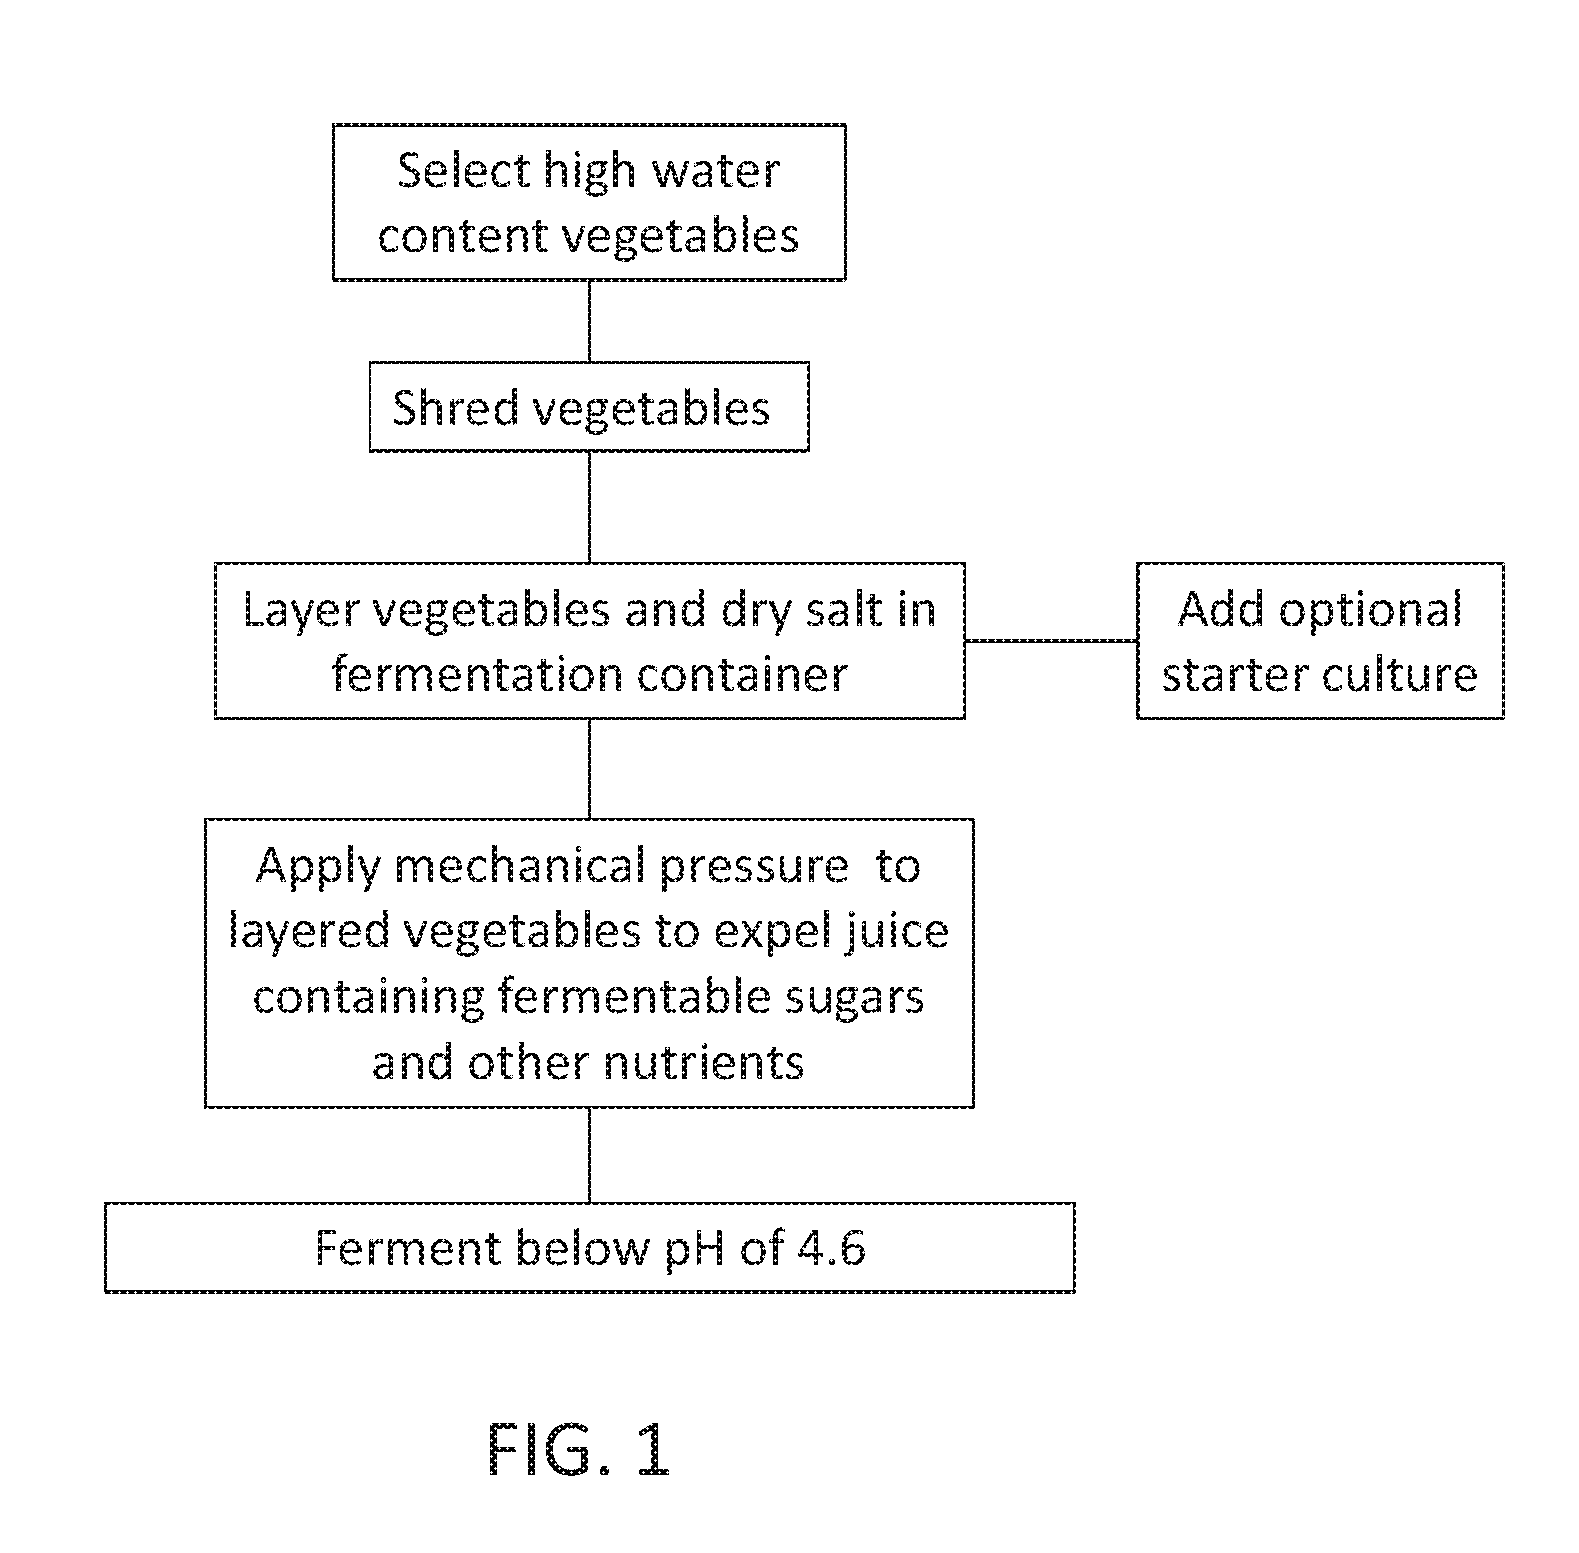 Formulation and process for making fermented probiotic food and beverage products